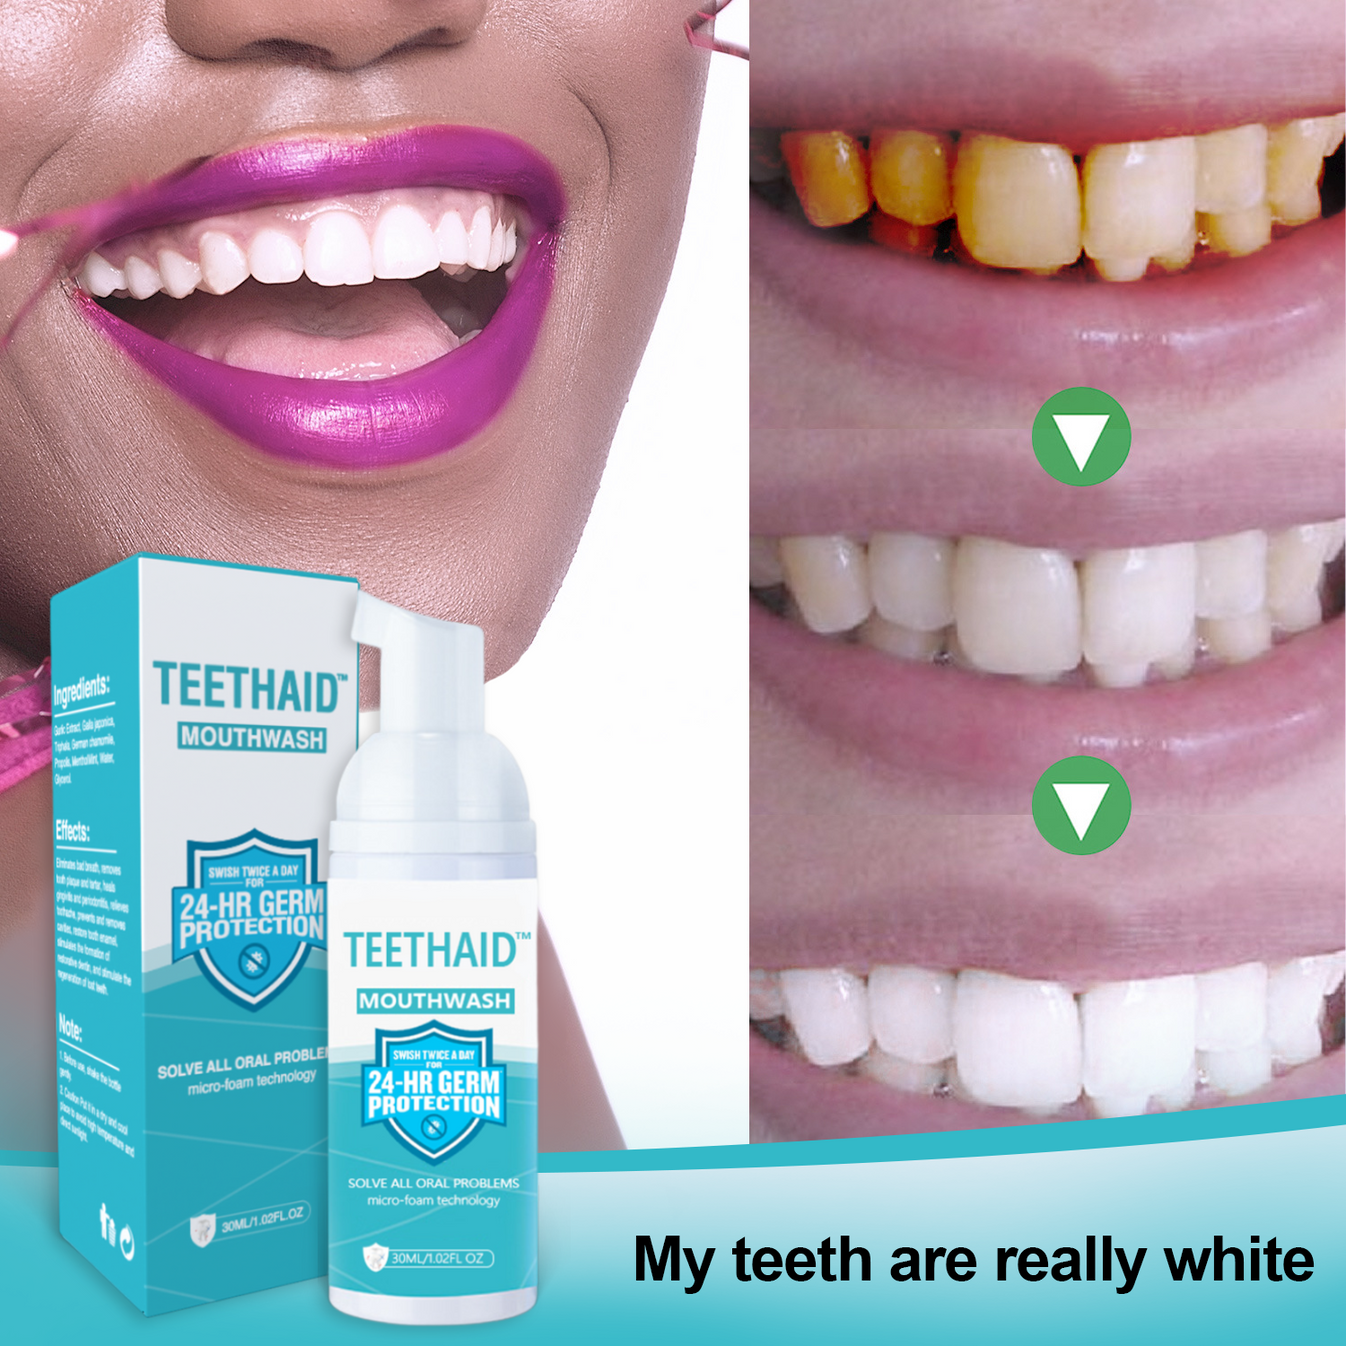 Teethaid™ All Natural Herbal Super Whitening and Restorative Mousse for Teeth and Mouth